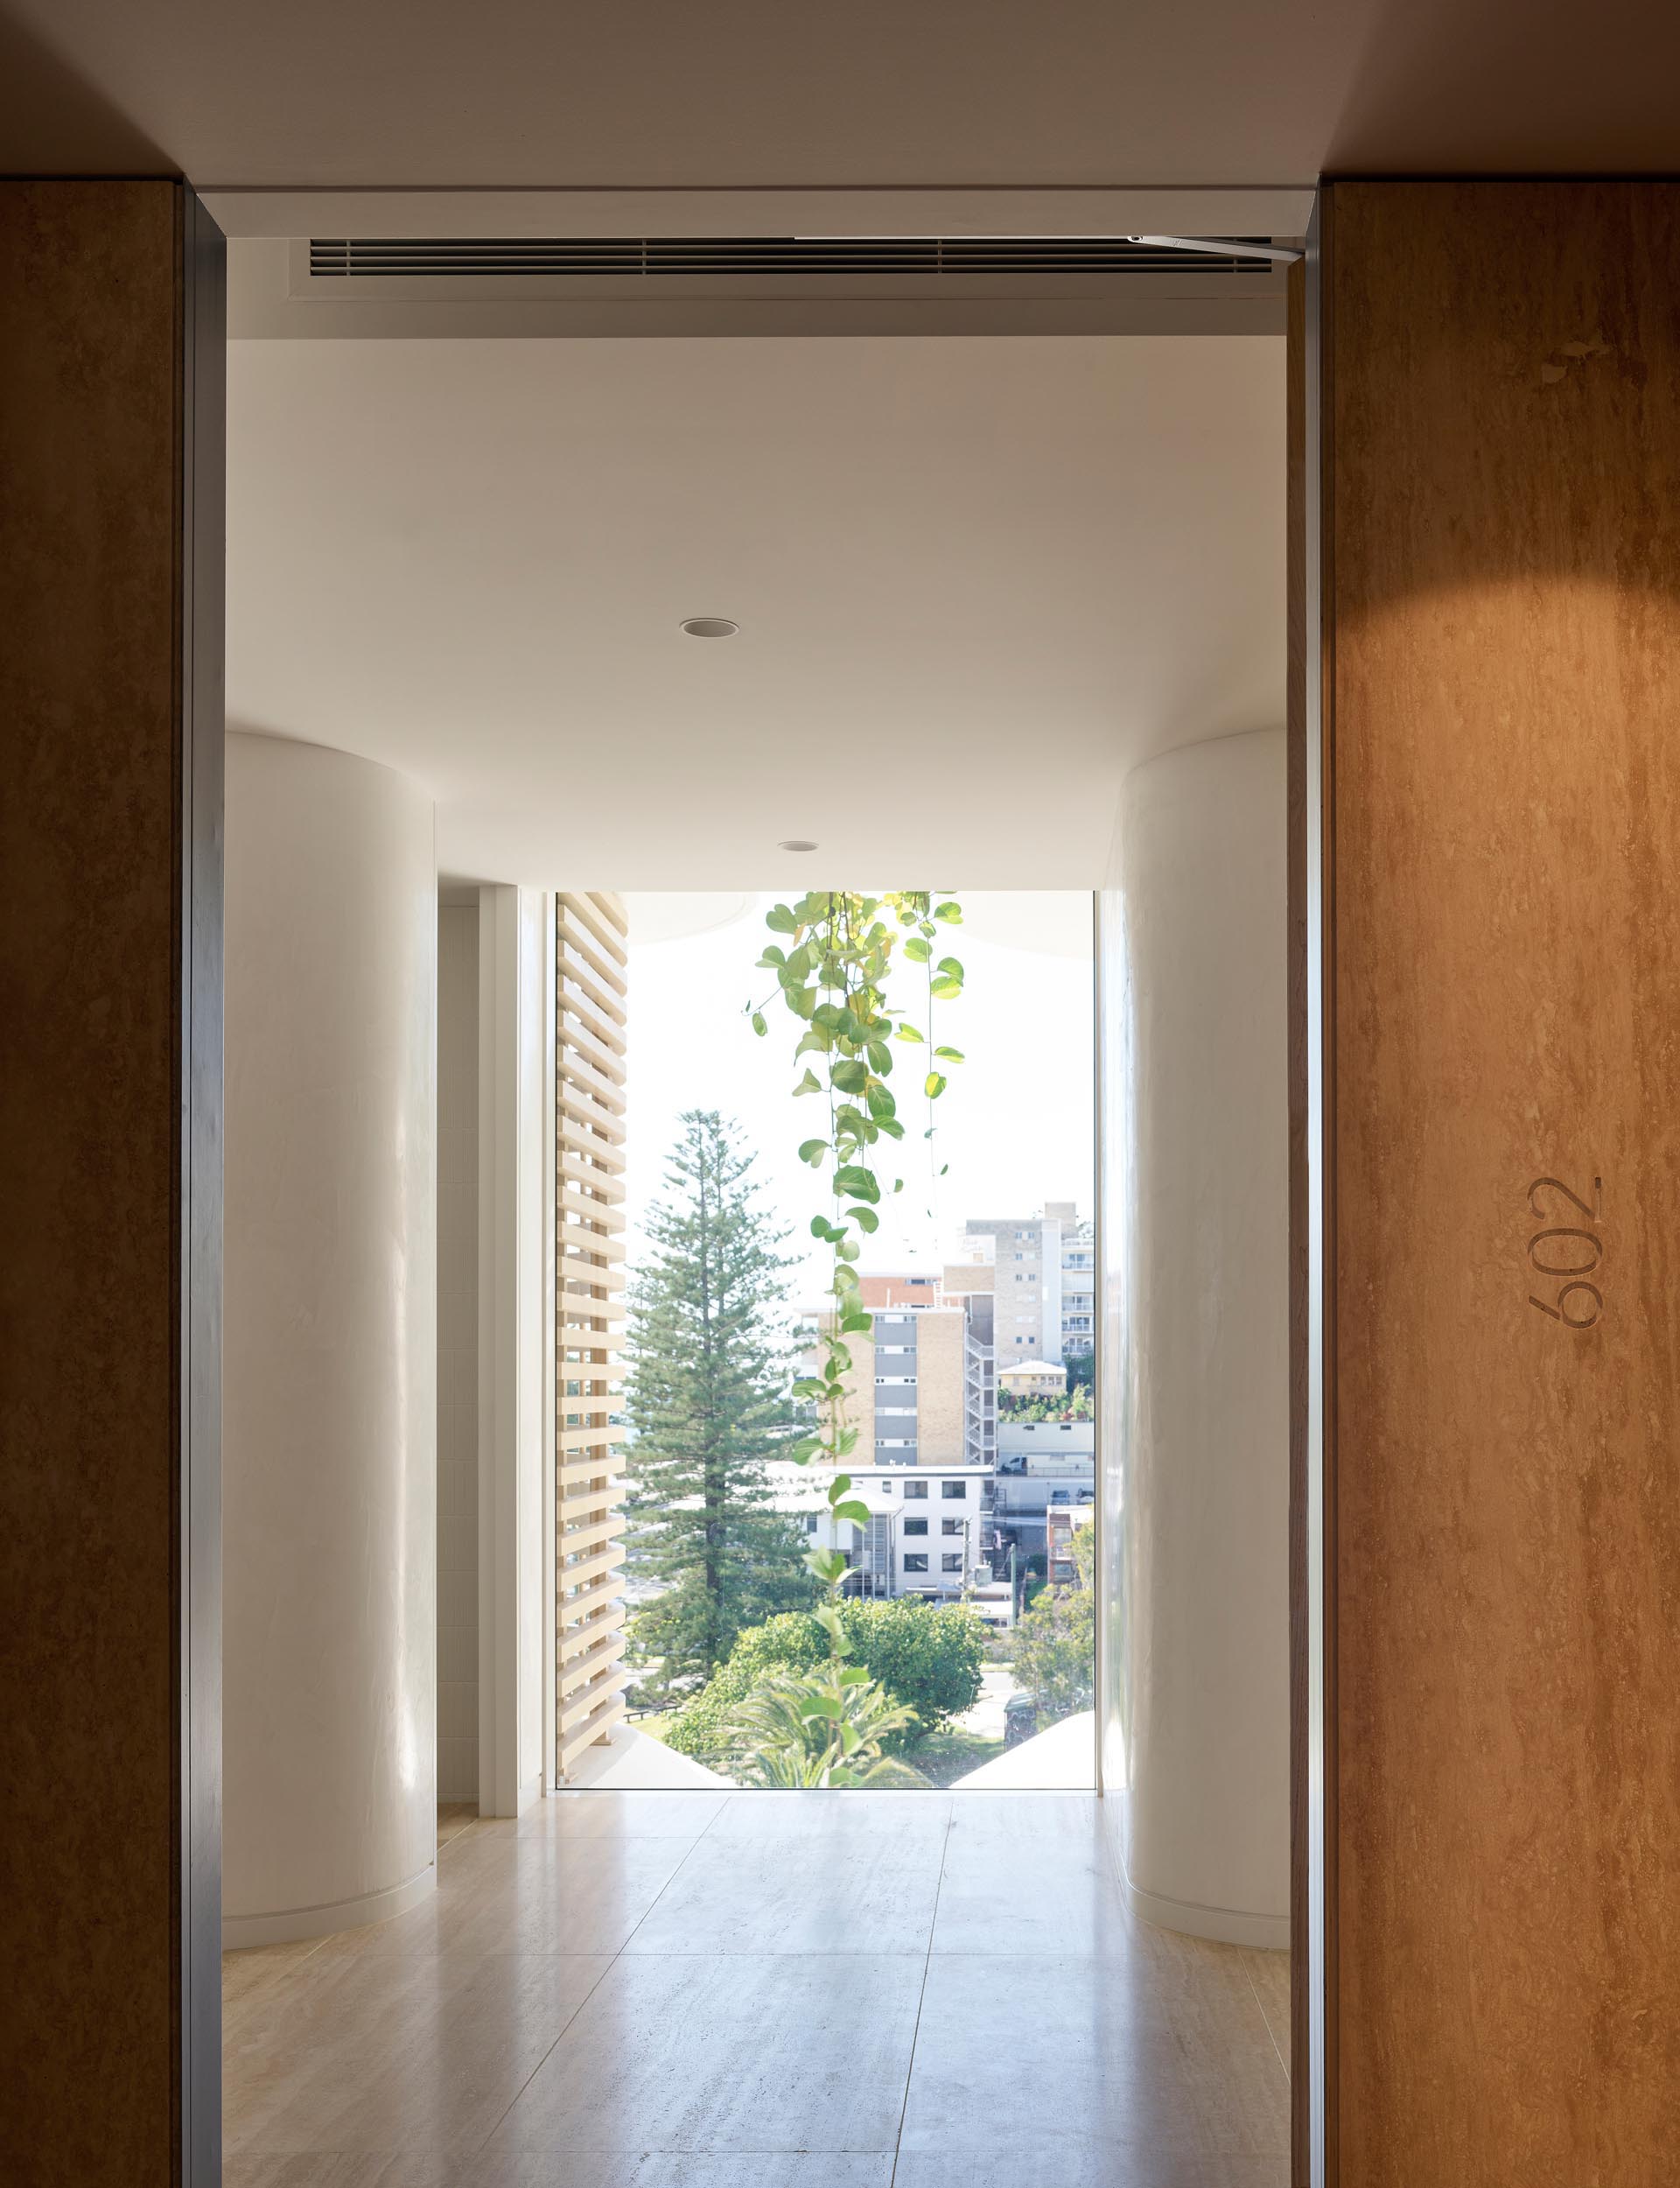 A modern apartment with a floor-to-ceiling window.